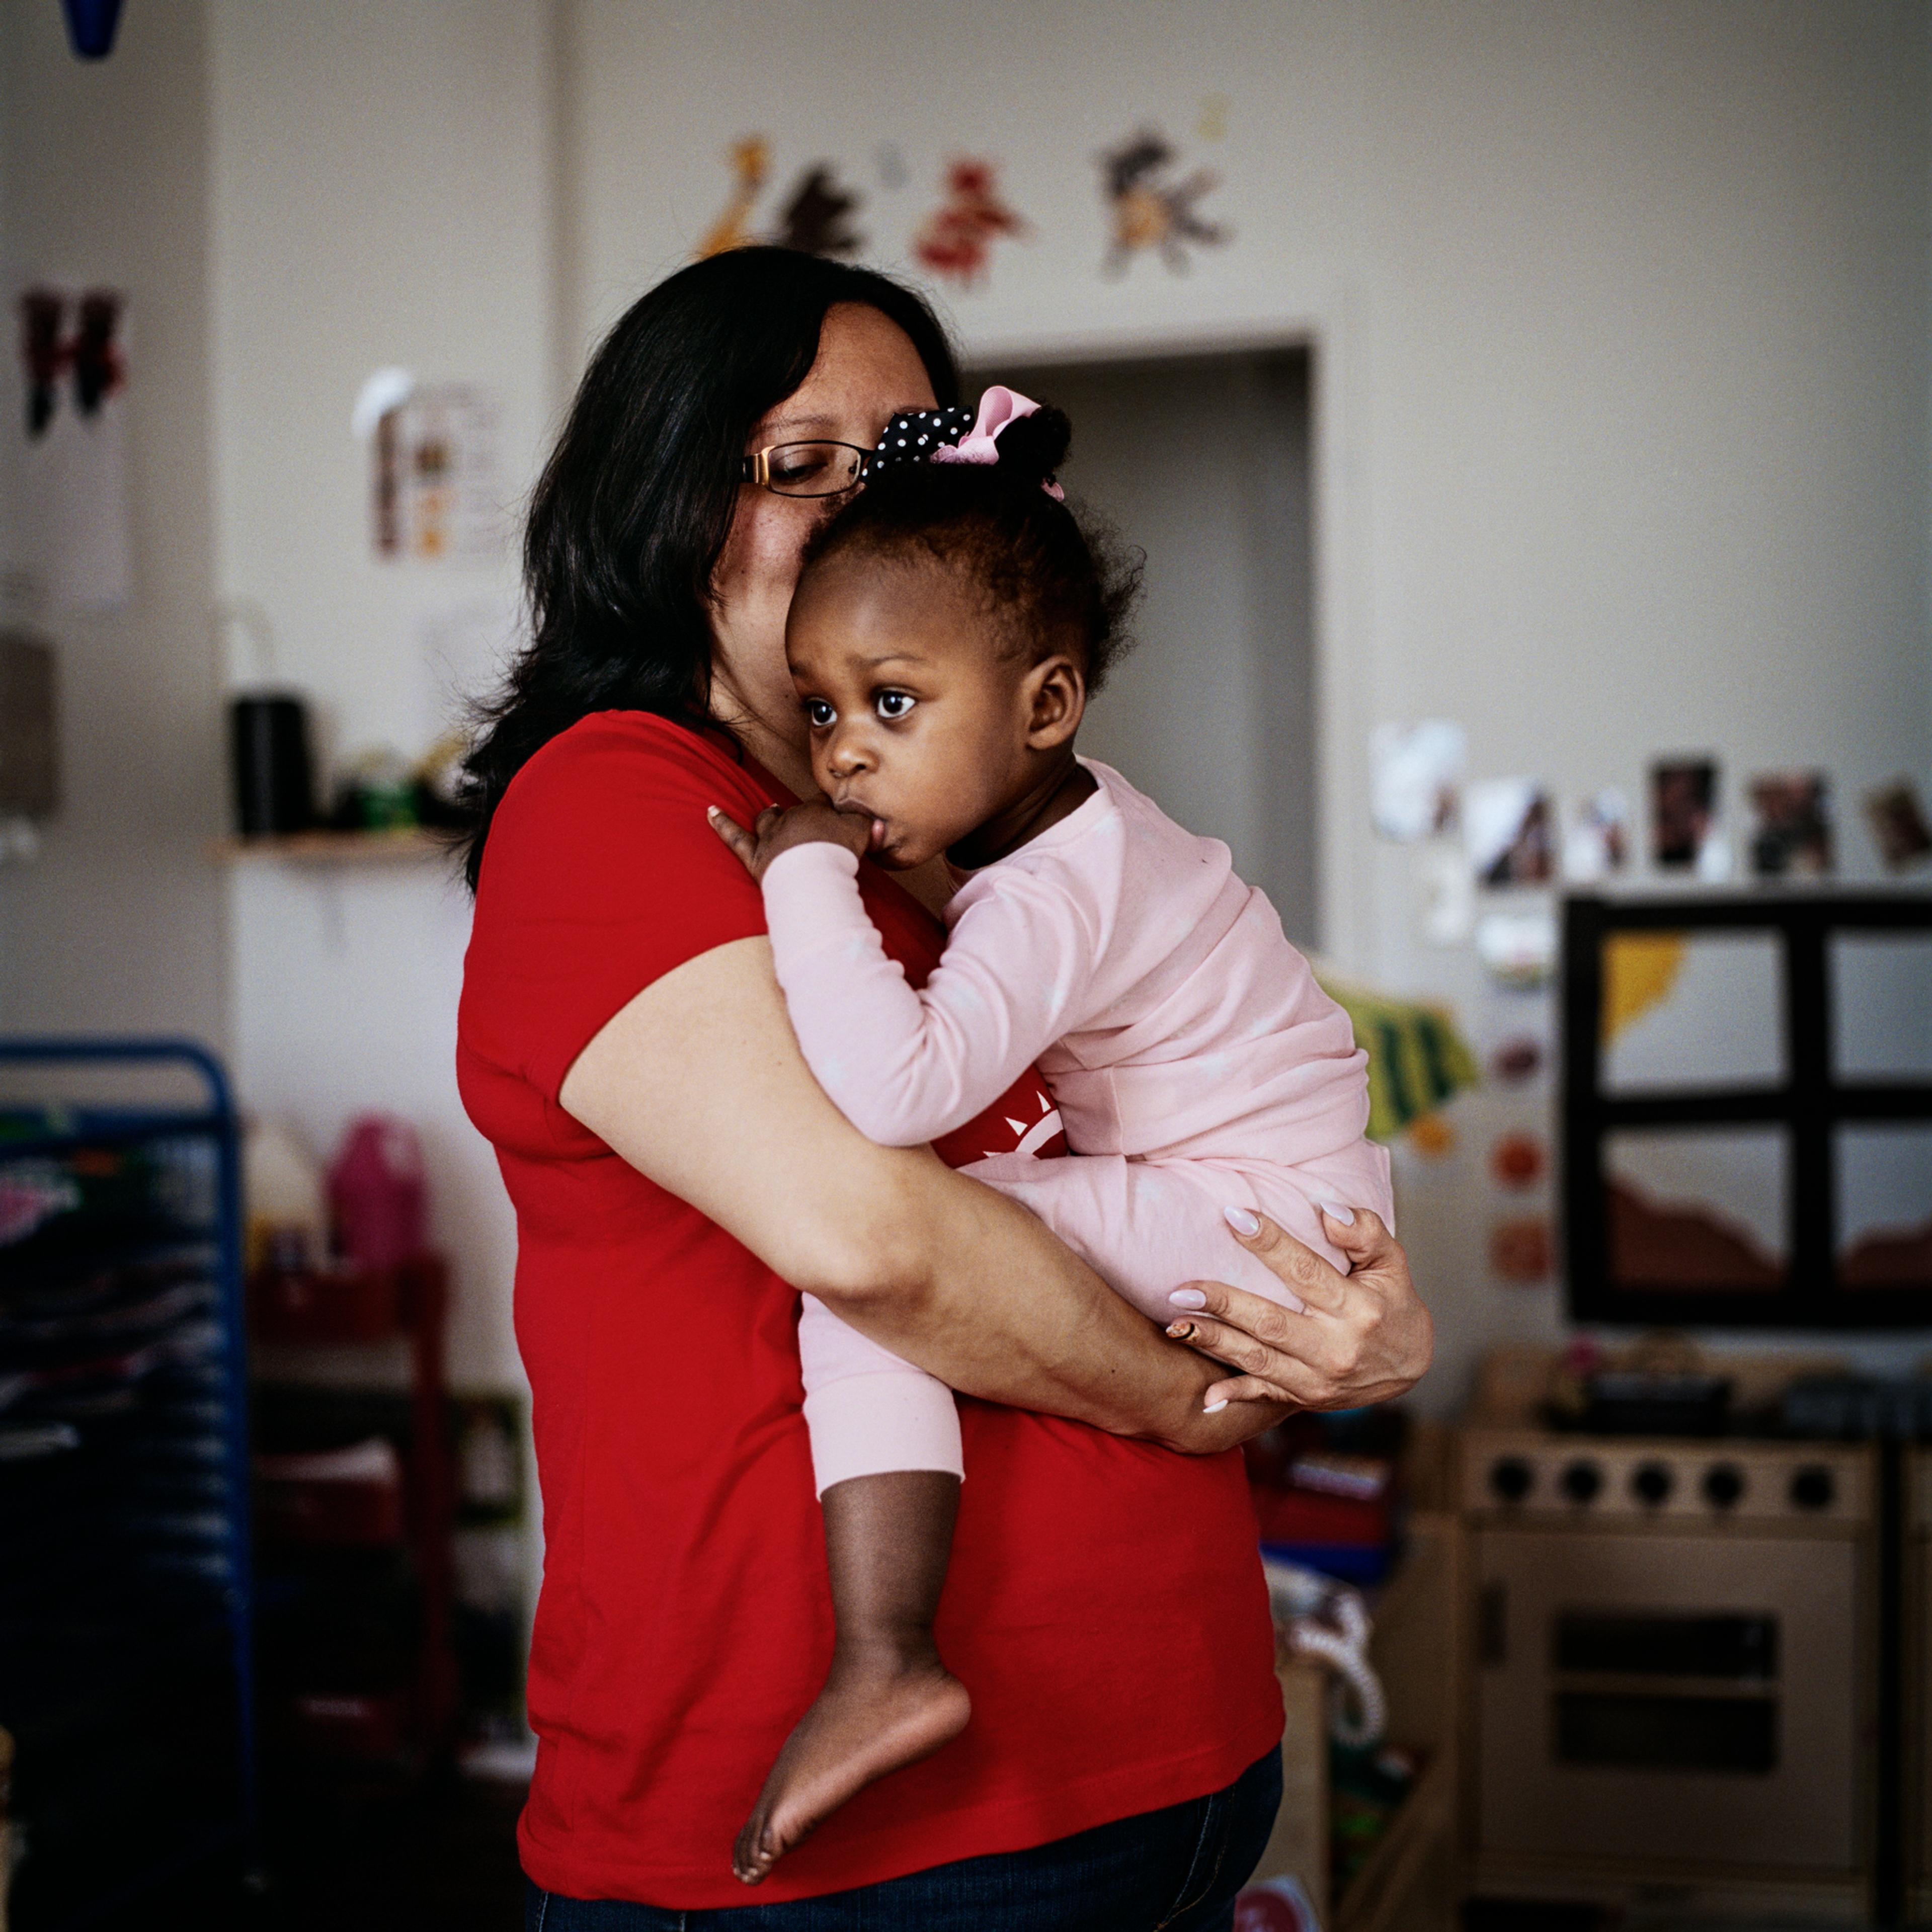 A photograph of a female caretaker and child sharing a hug